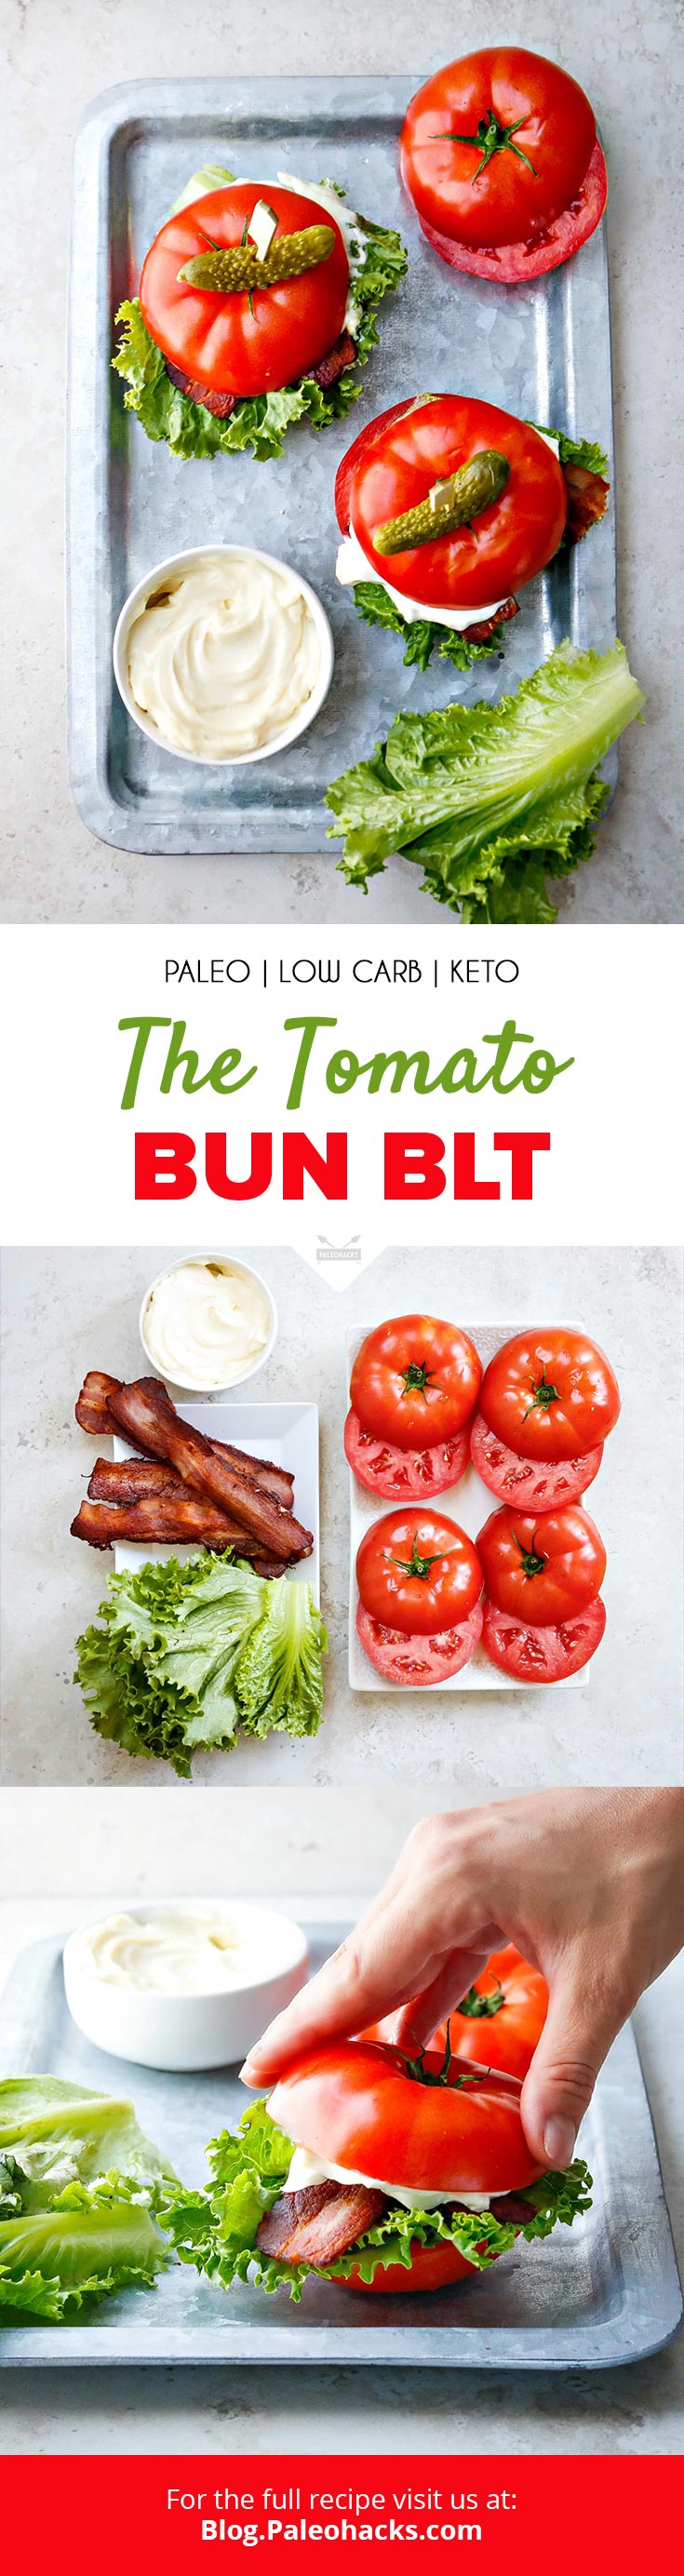 Ditch the bread and swap your buns with juicy tomatoes in this fresh take on a BLT. Same great taste, way more nutrients.